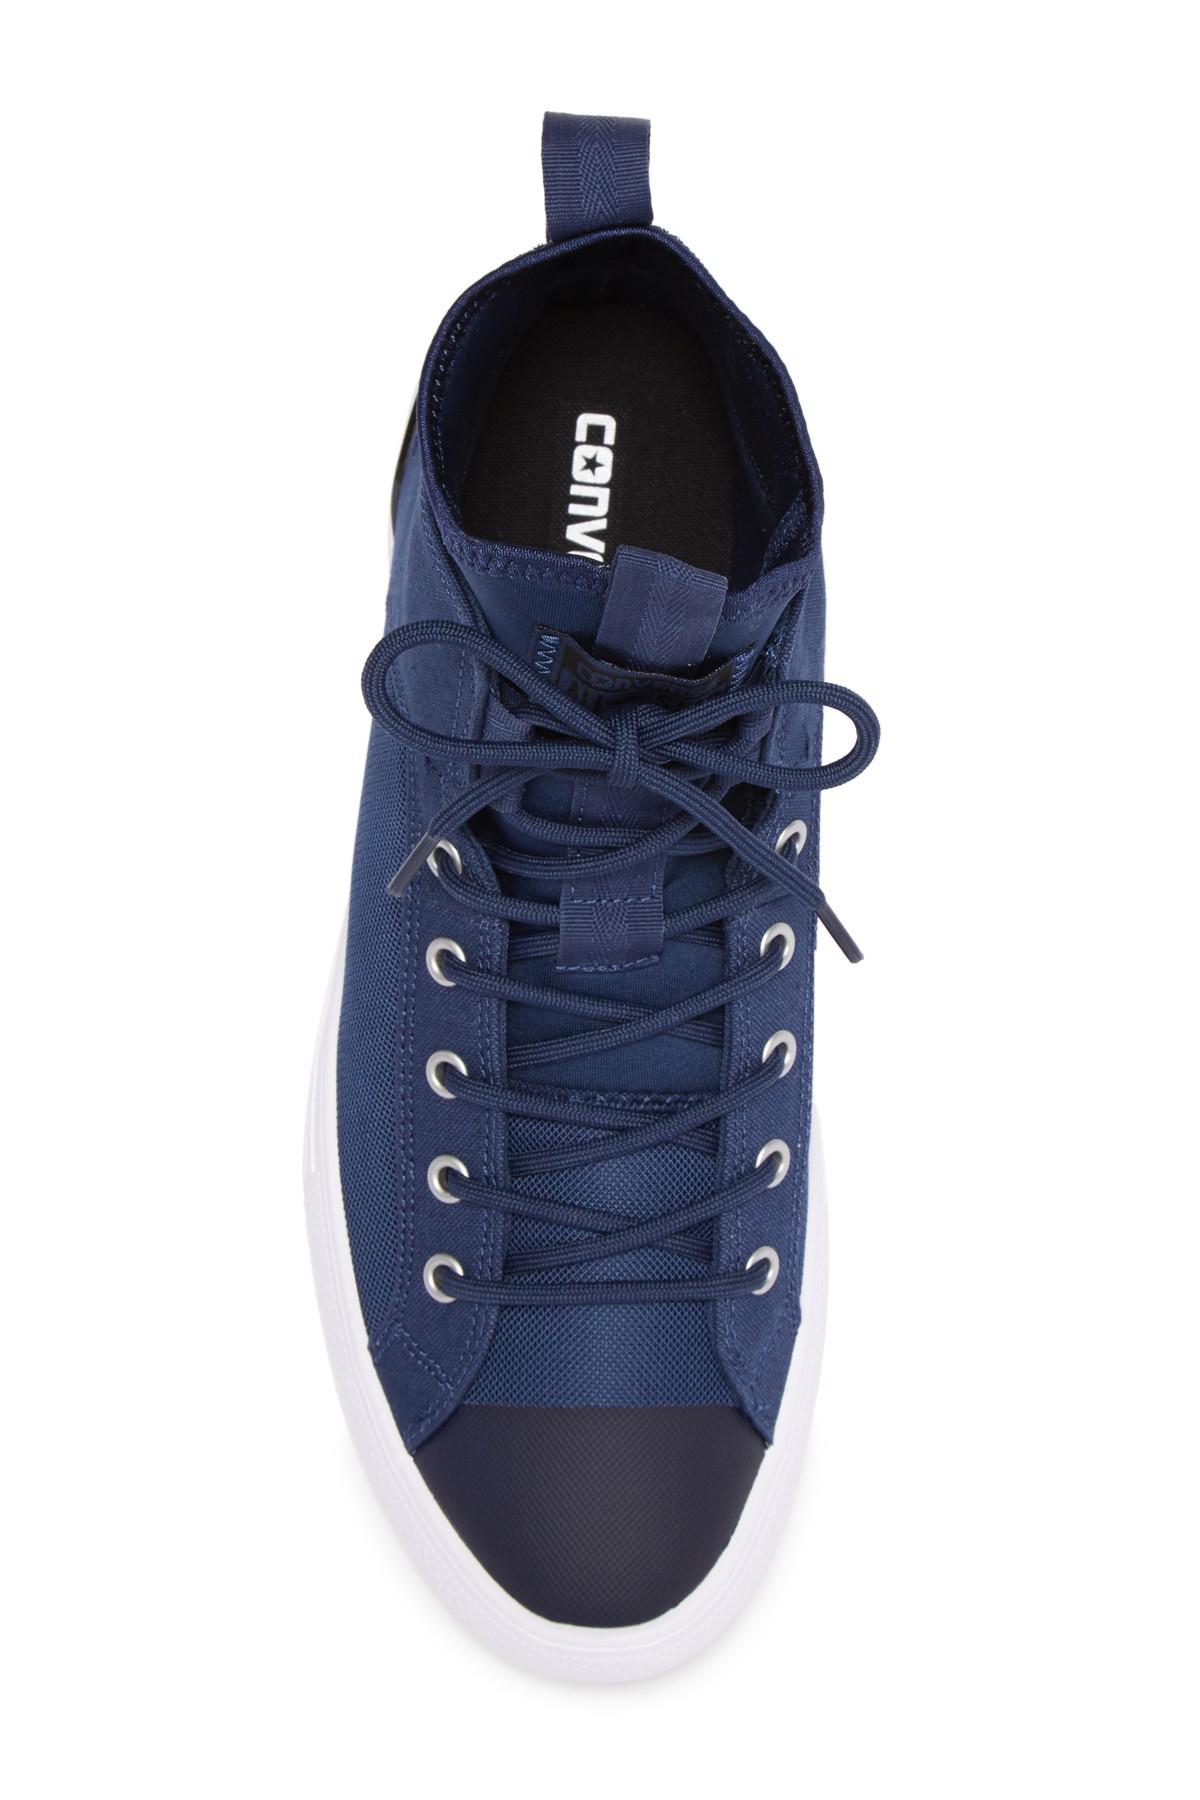 Converse Chuck Taylor All Star Mid Sneaker (unisex) in Blue for Men Lyst